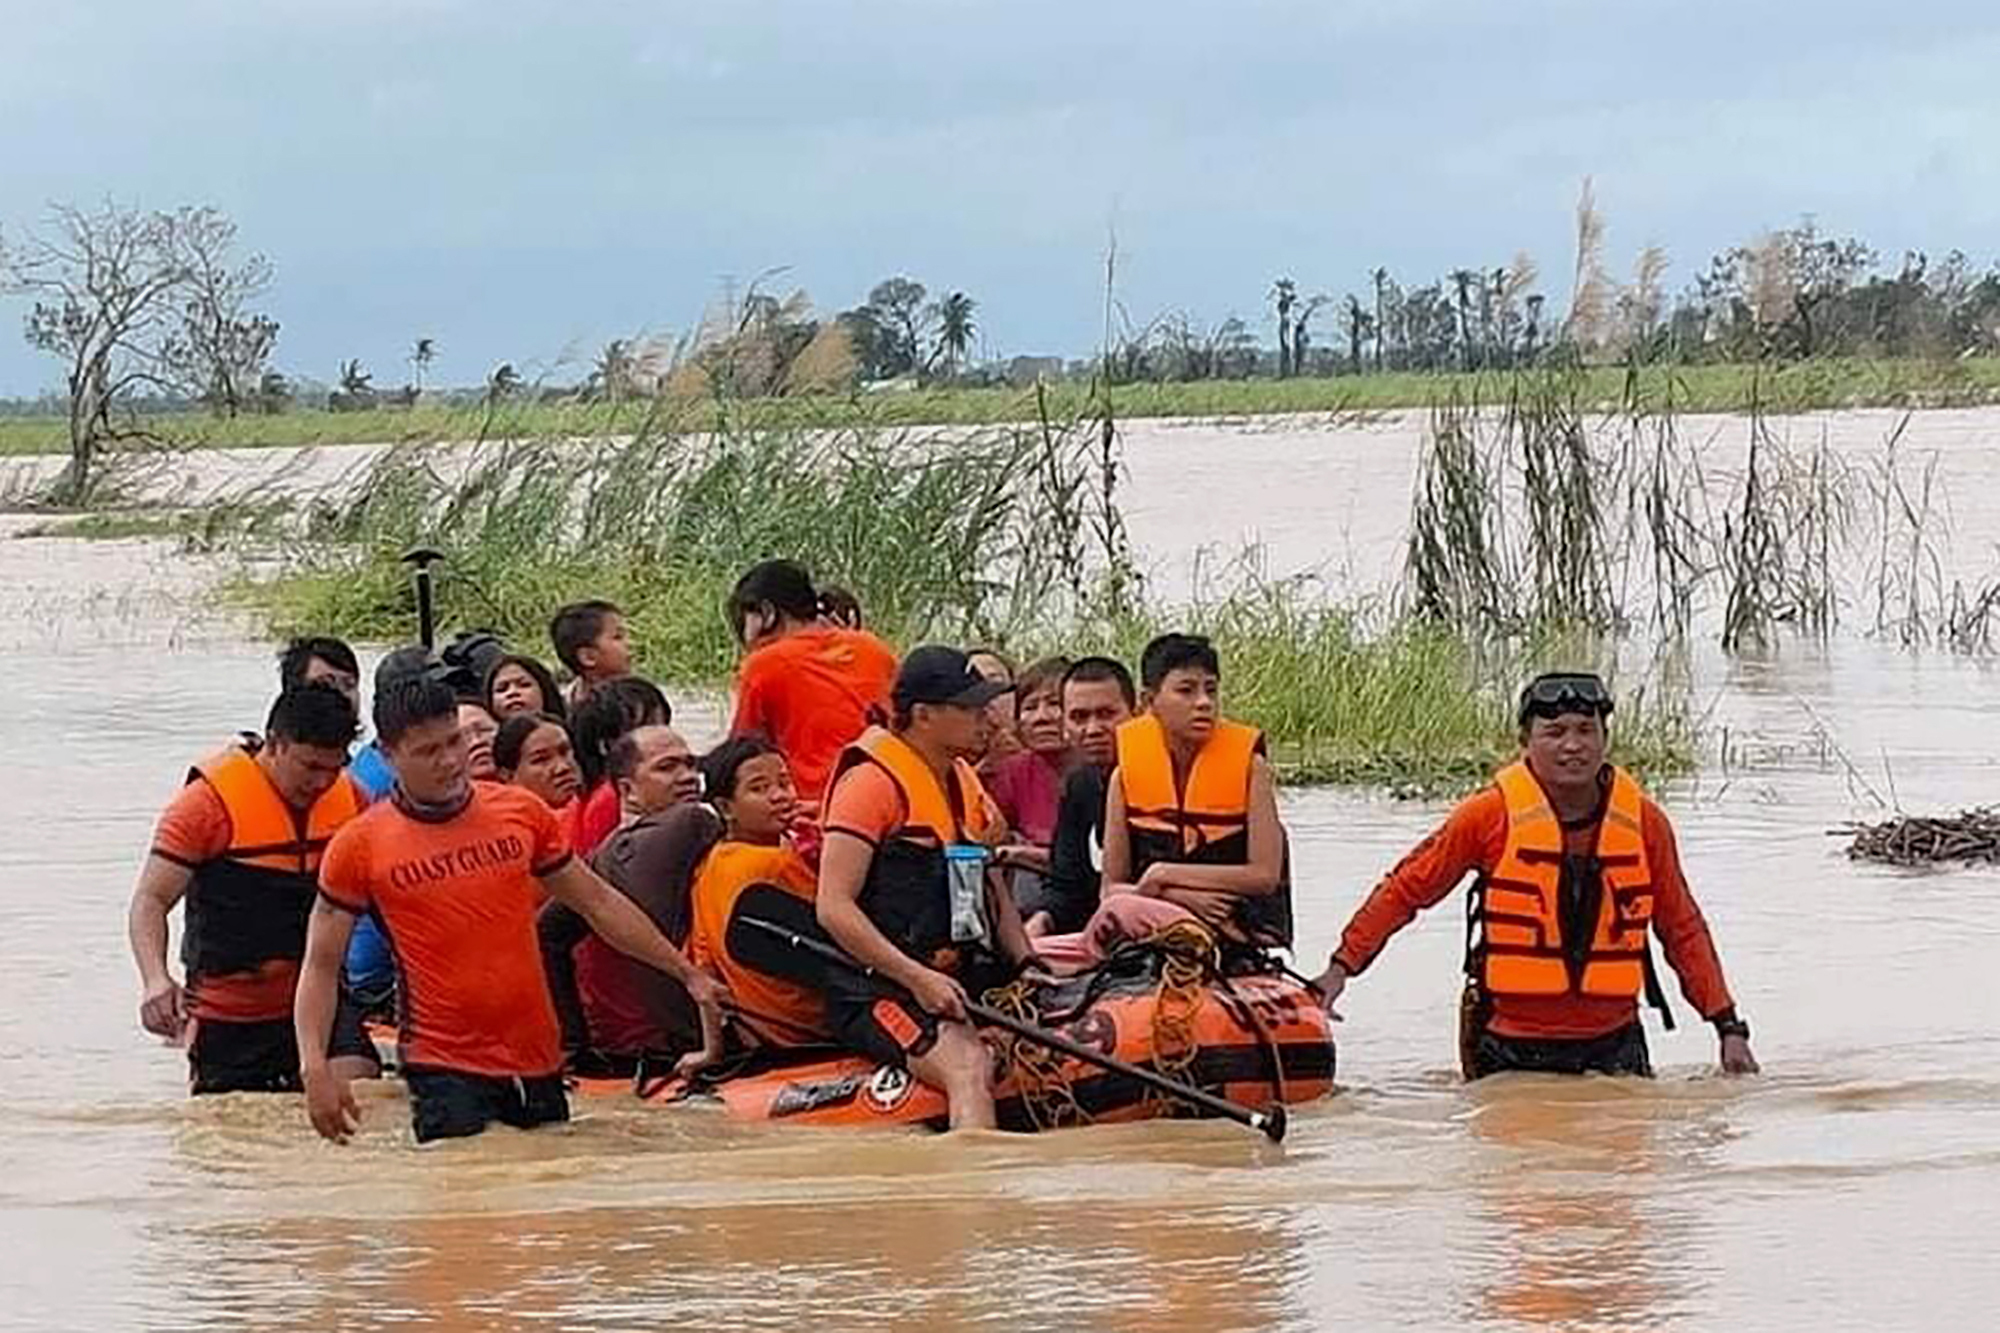 In this handout photo provided by the Philippine Coast Guard, rescuers pull a rubber boat as they assist residents who were trapped in their homes after floodwaters caused by Typhoon Rai inundated their village in Loboc, Bohol, central Philippines on Friday, Dec. 17, 2021. 